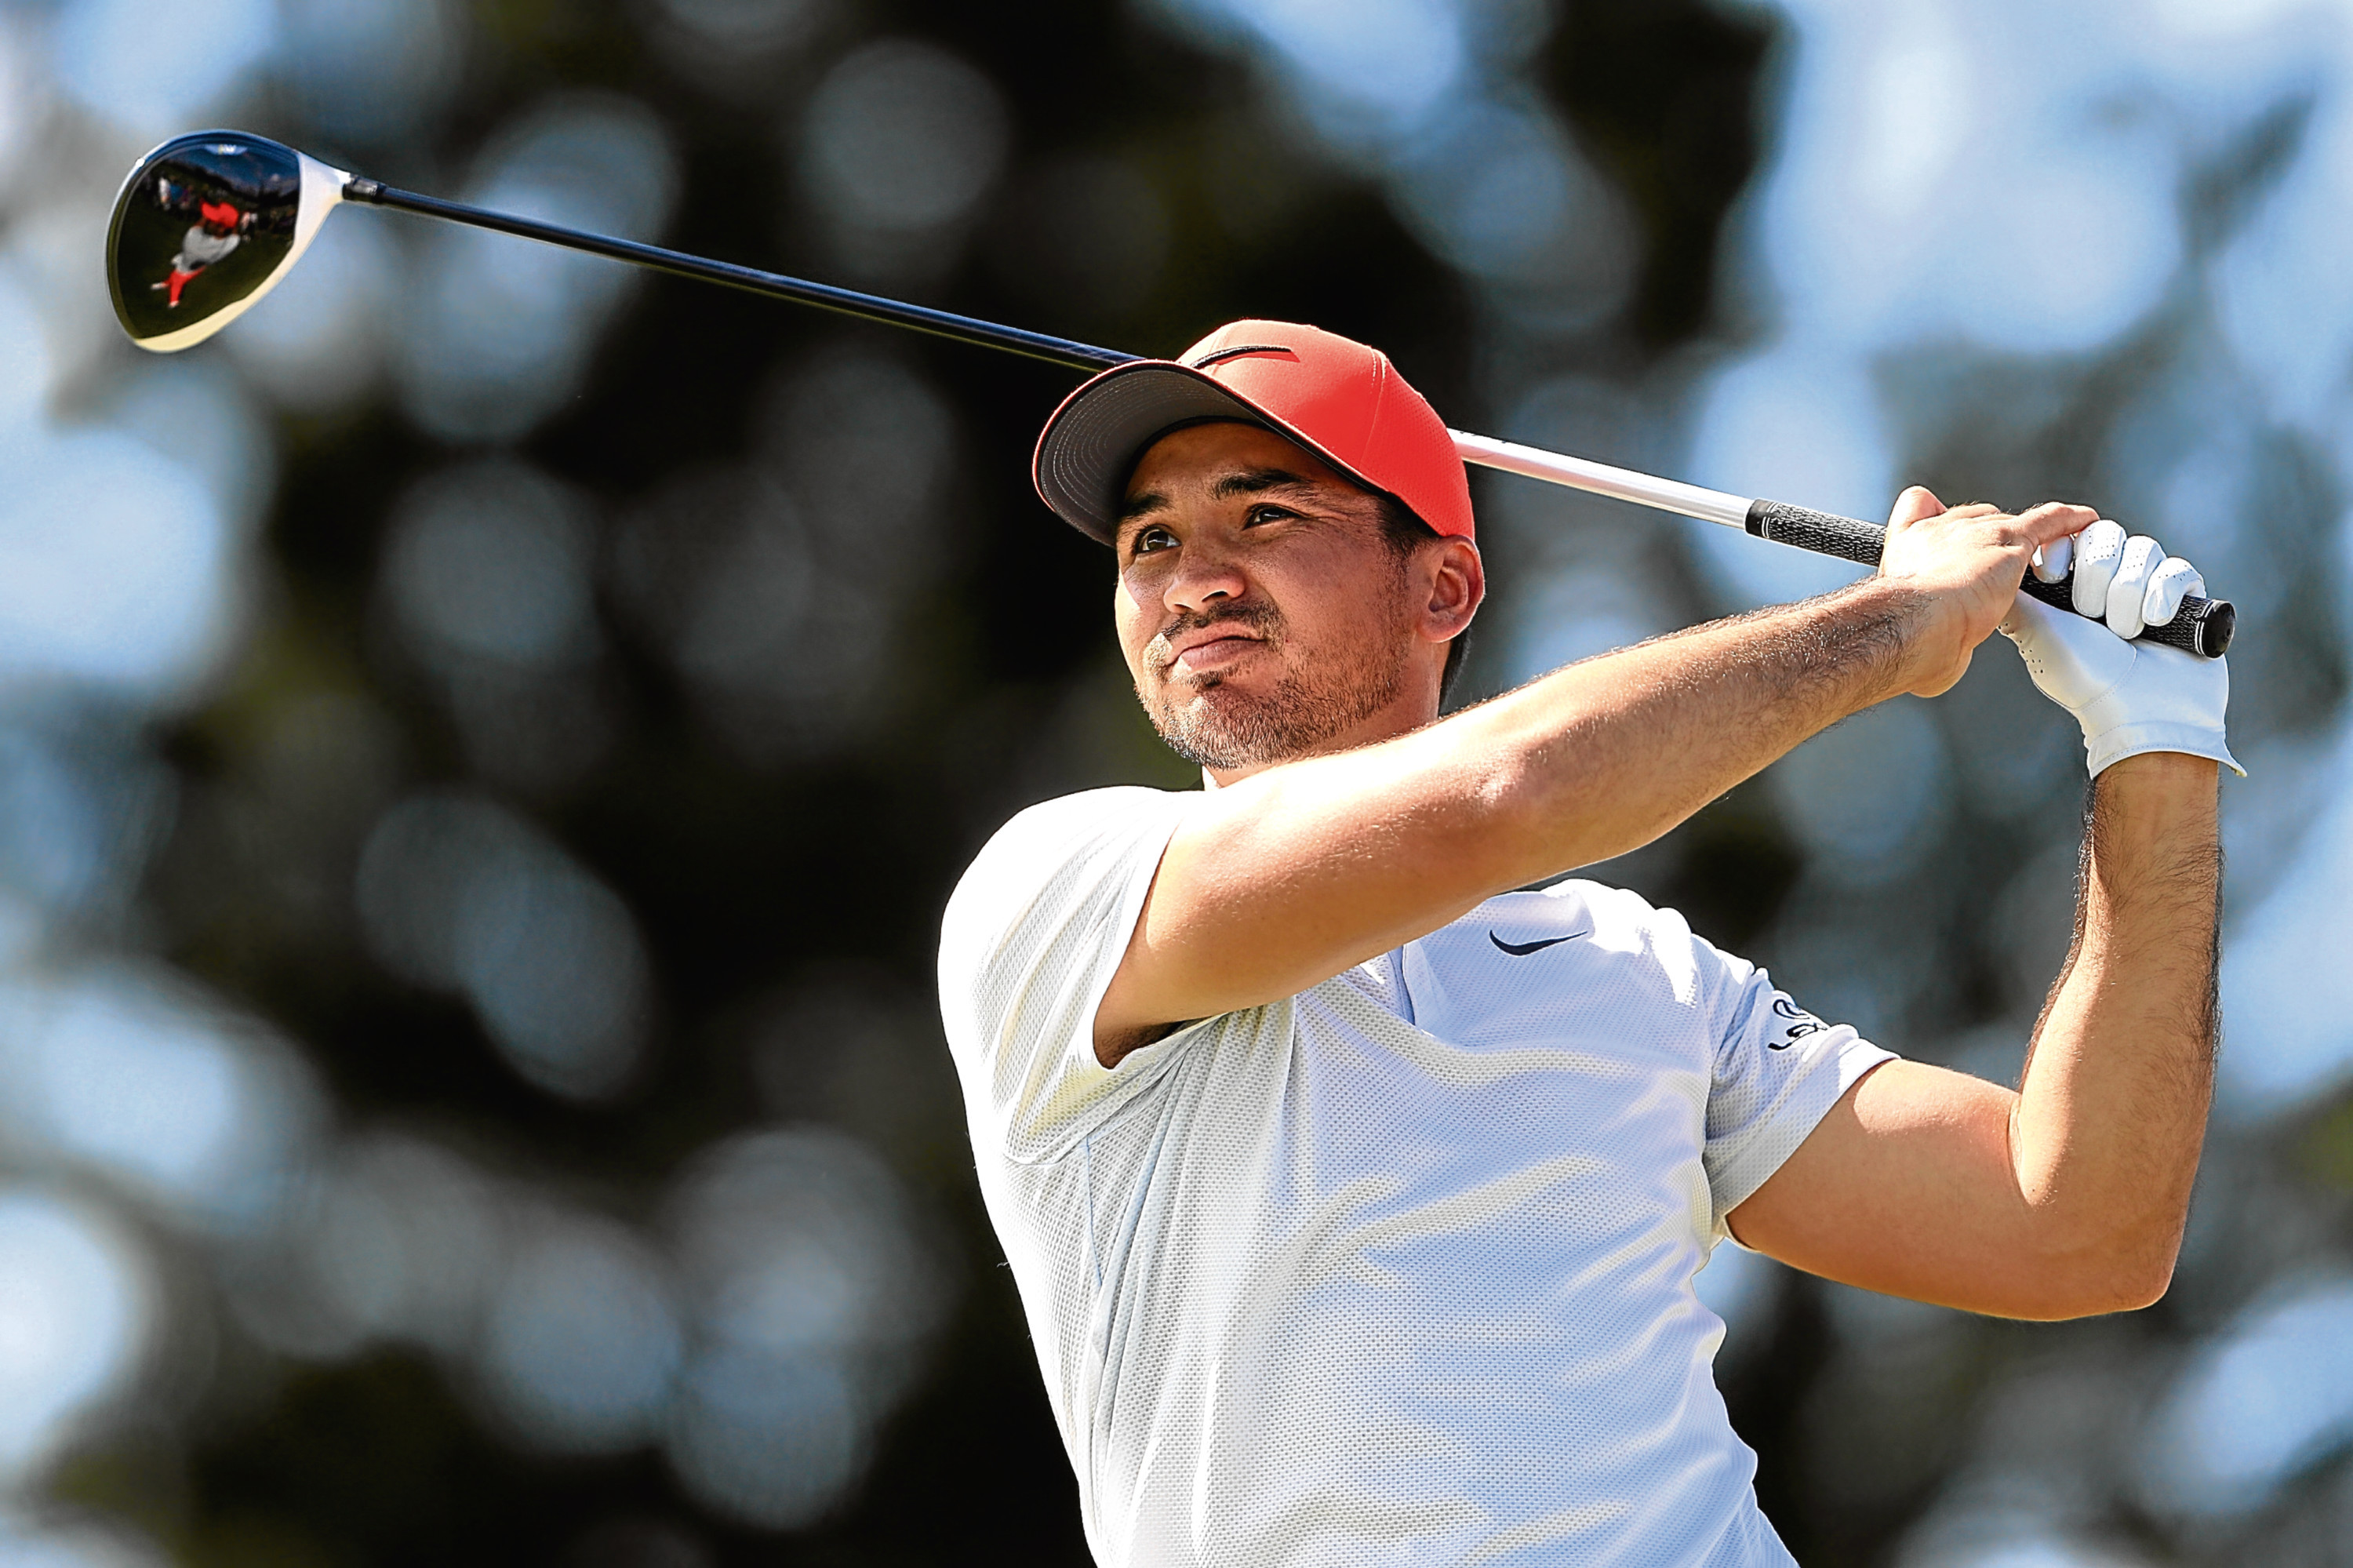 Jason day would like you tok buy his new falsh Nike gear, but don;t you dare play golf as slowly as he does.